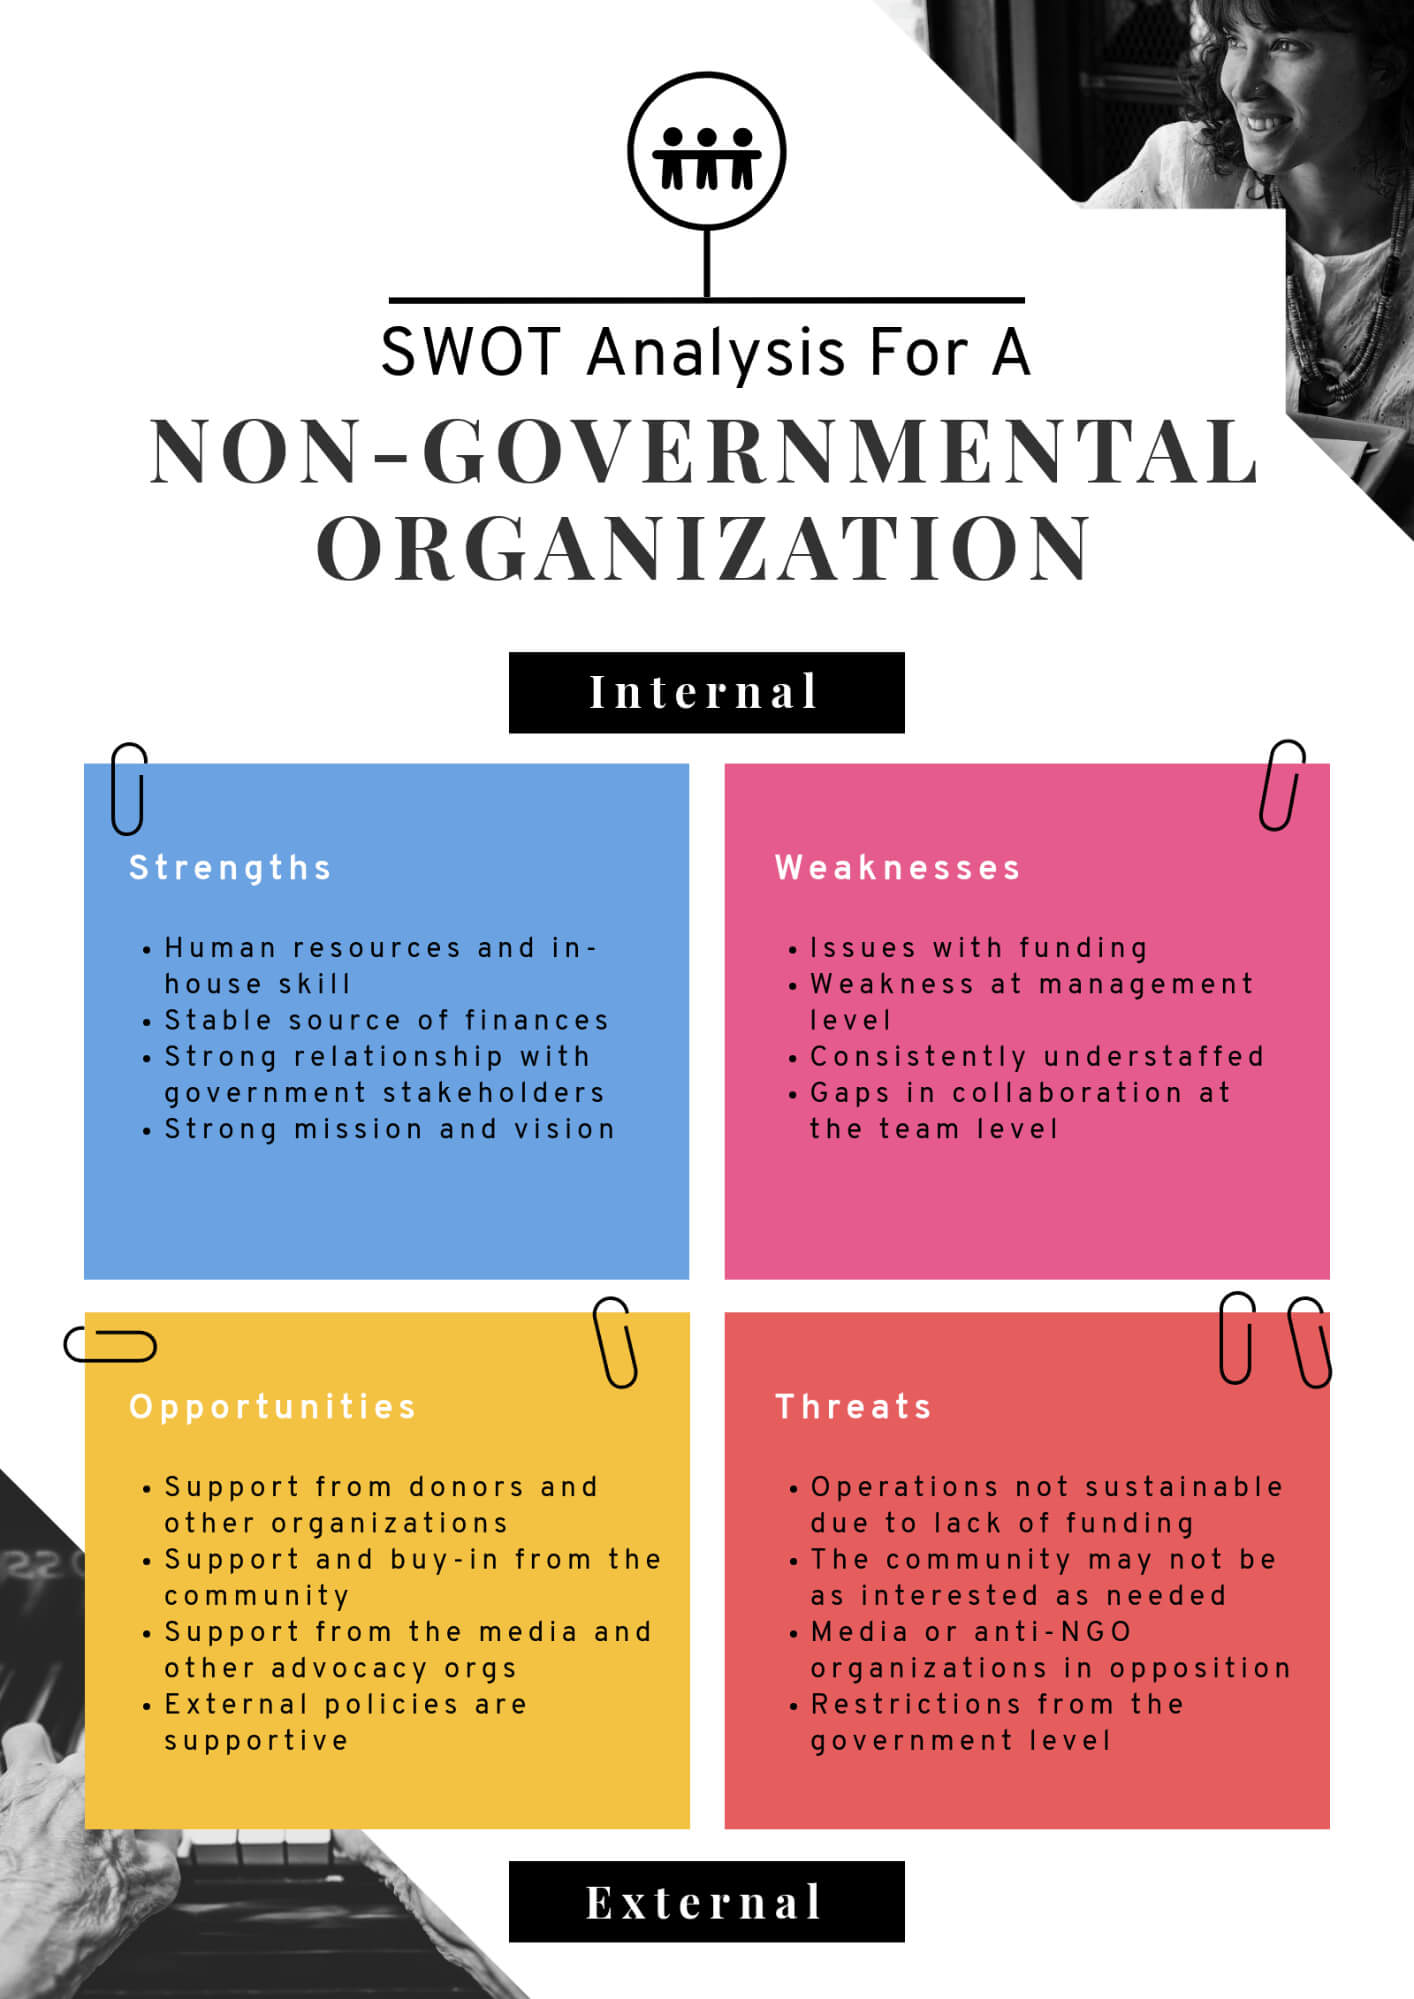 Swot Analysis: How To Structure And Visualize It | Piktochart Intended For Strategic Analysis Report Template